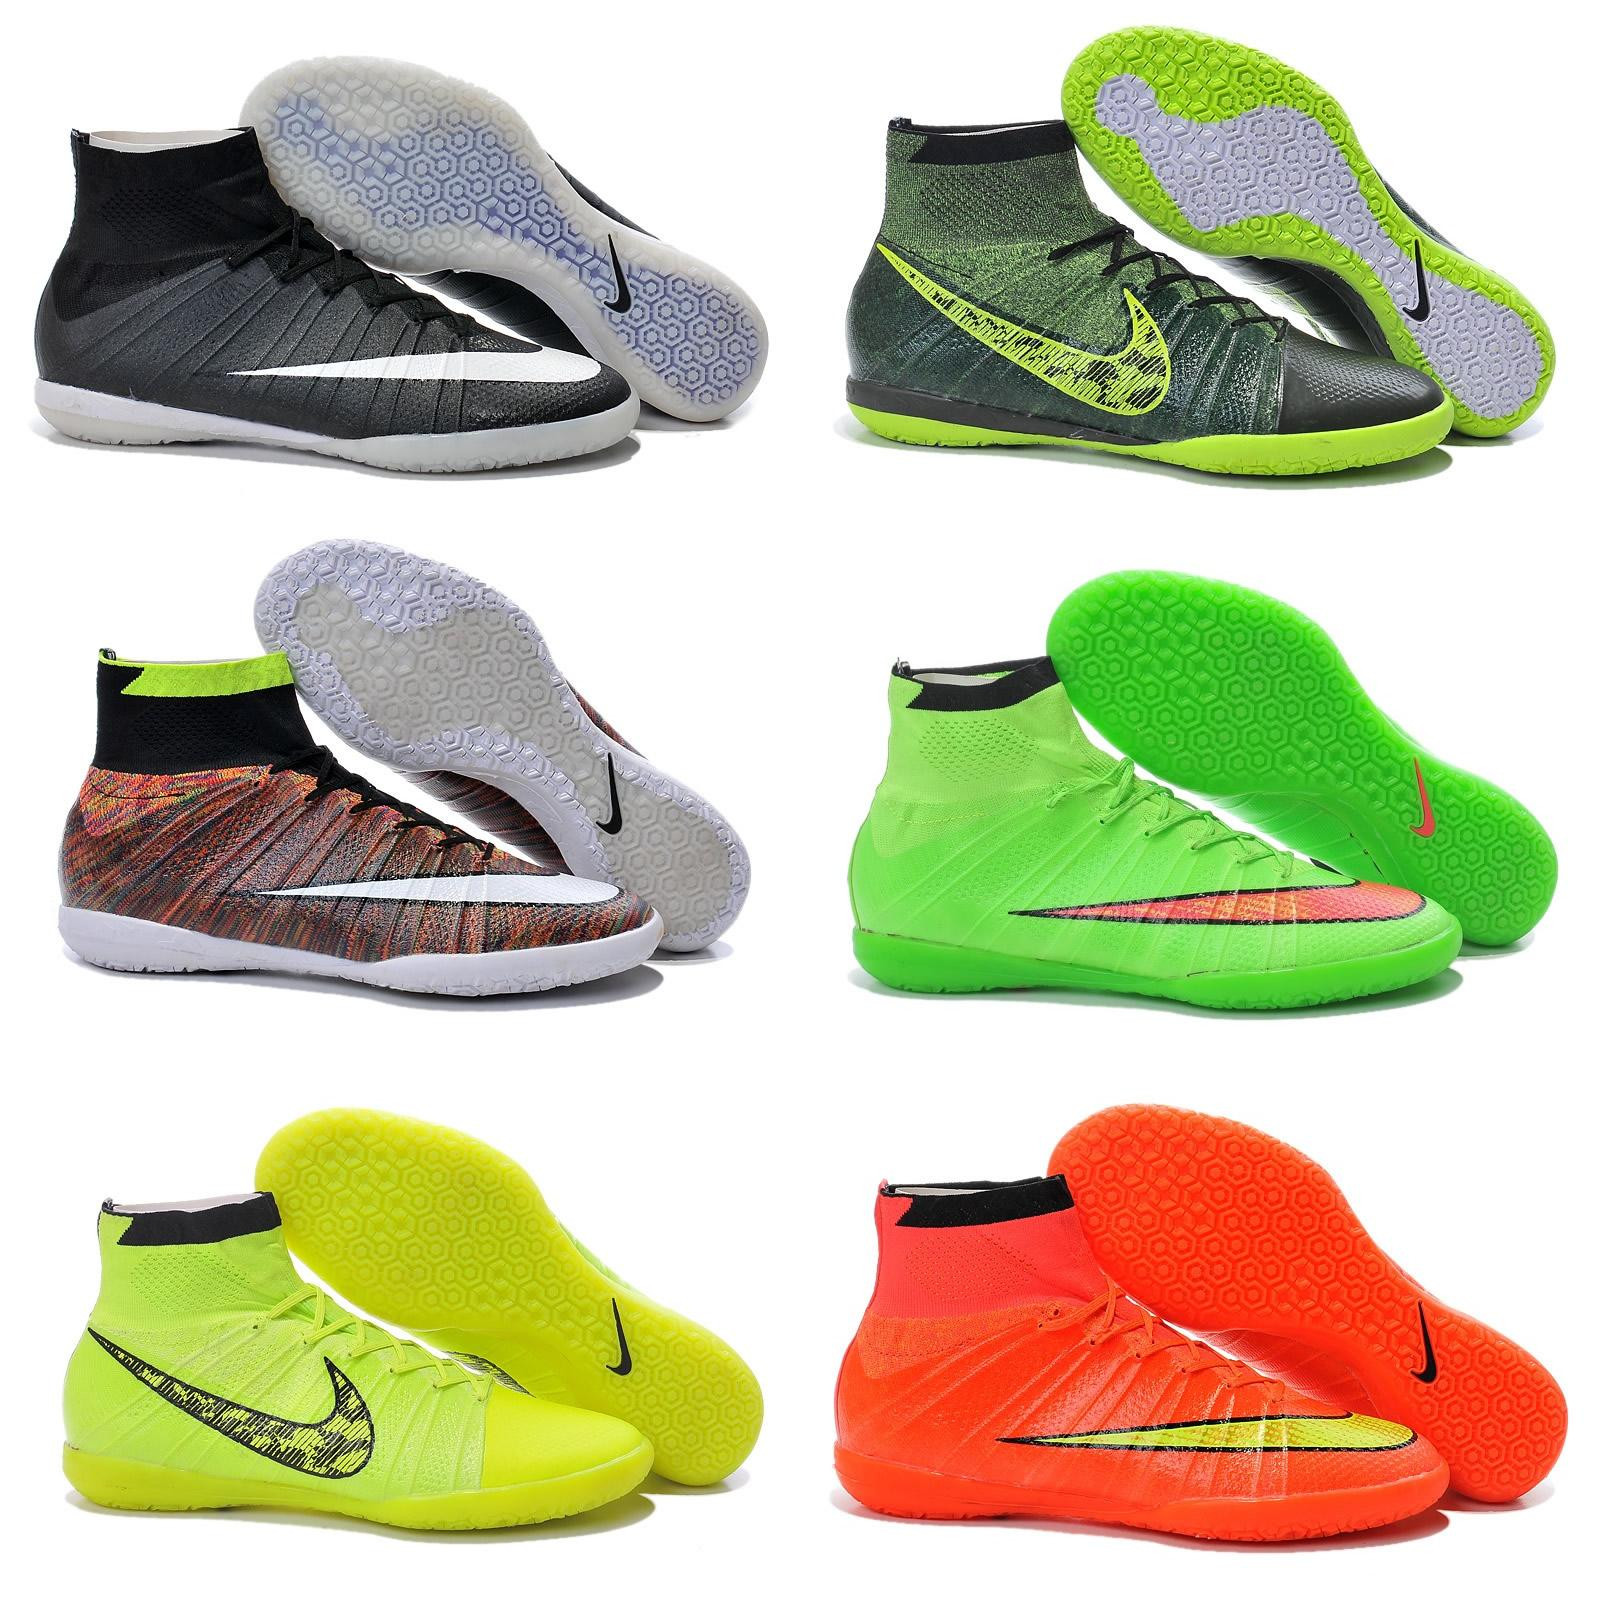 Nike Indoor Shoes For Kids
 Cheap Kids Nike Soccer Indoor High Tops